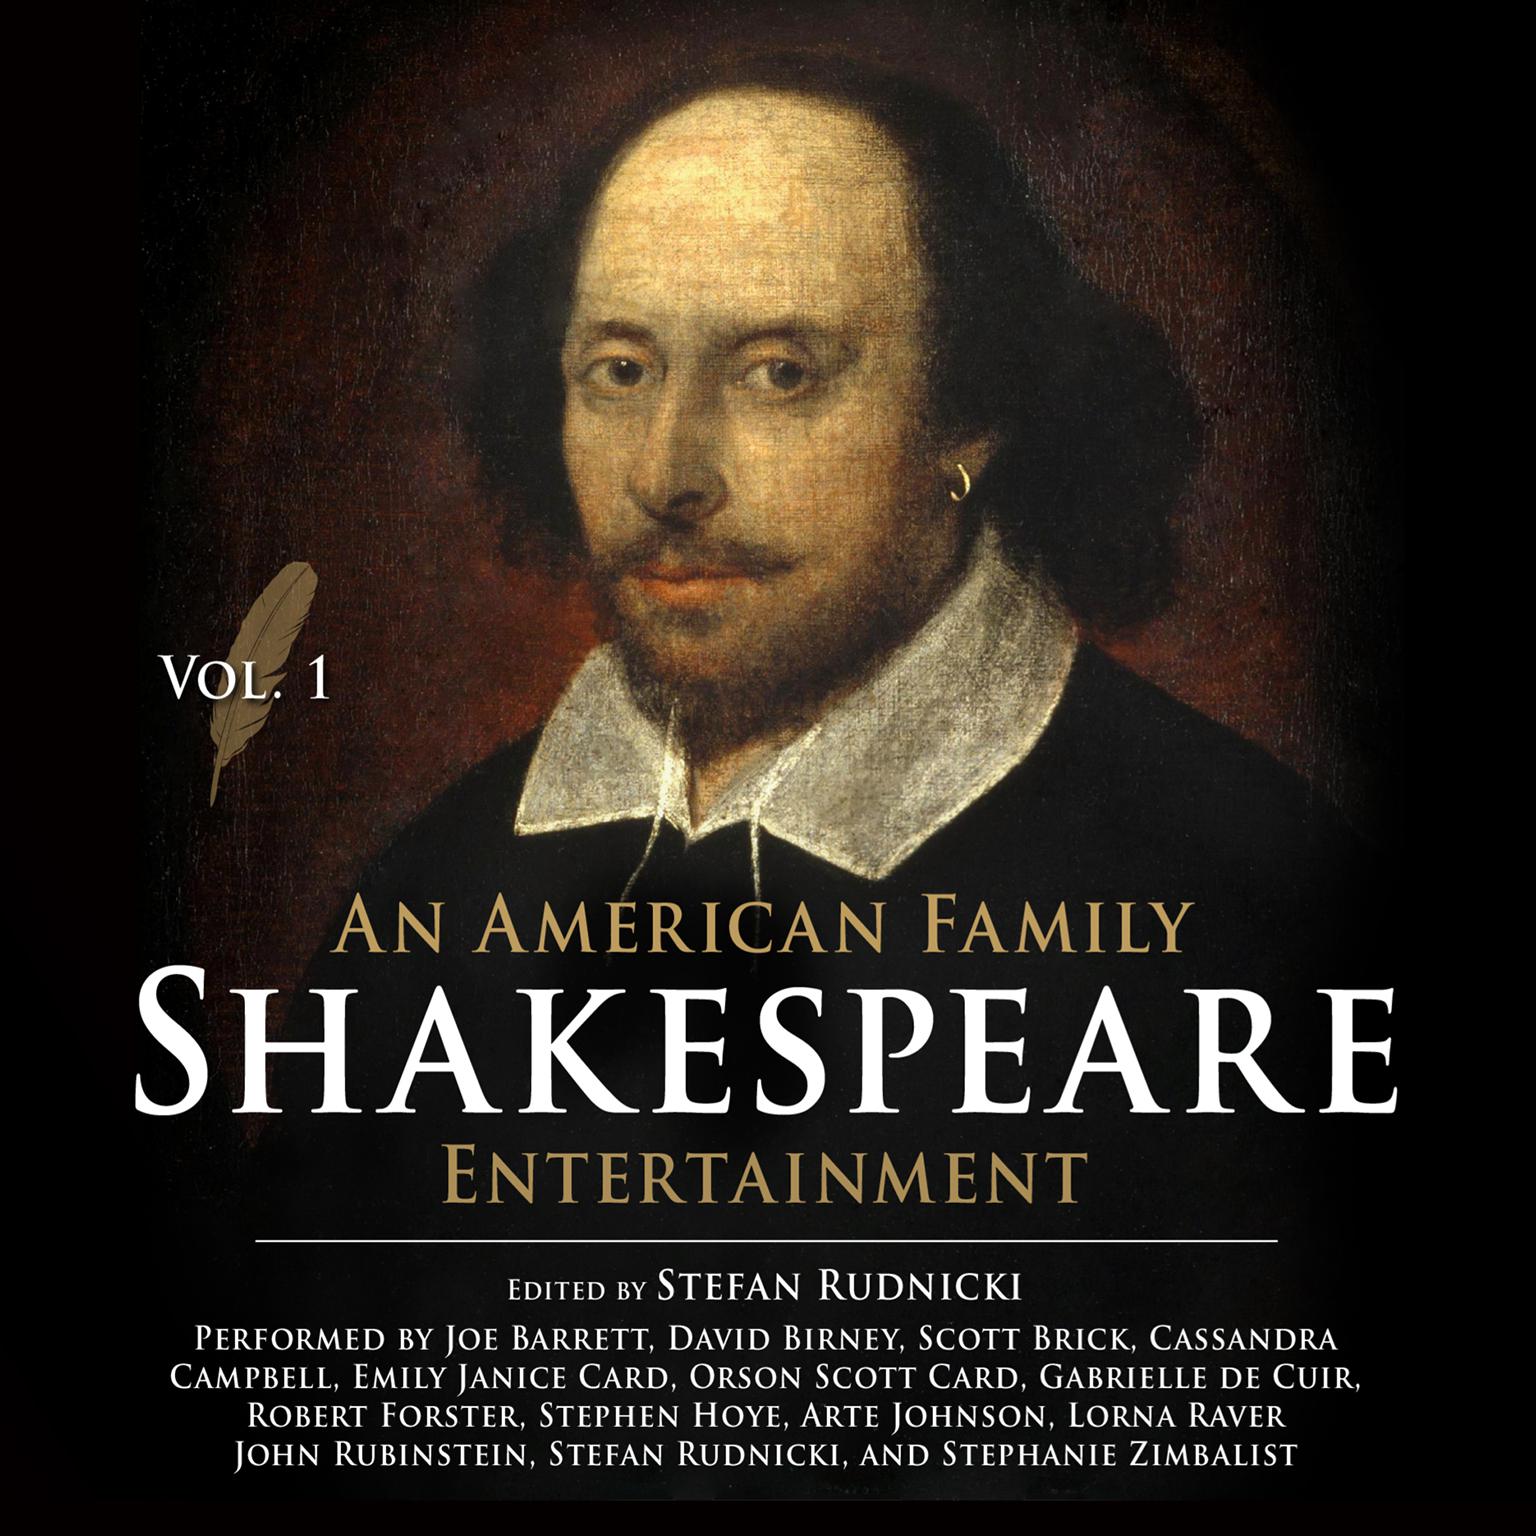 An American Family Shakespeare Entertainment, Vol. 1 (Abridged) Audiobook, by Stefan Rudnicki